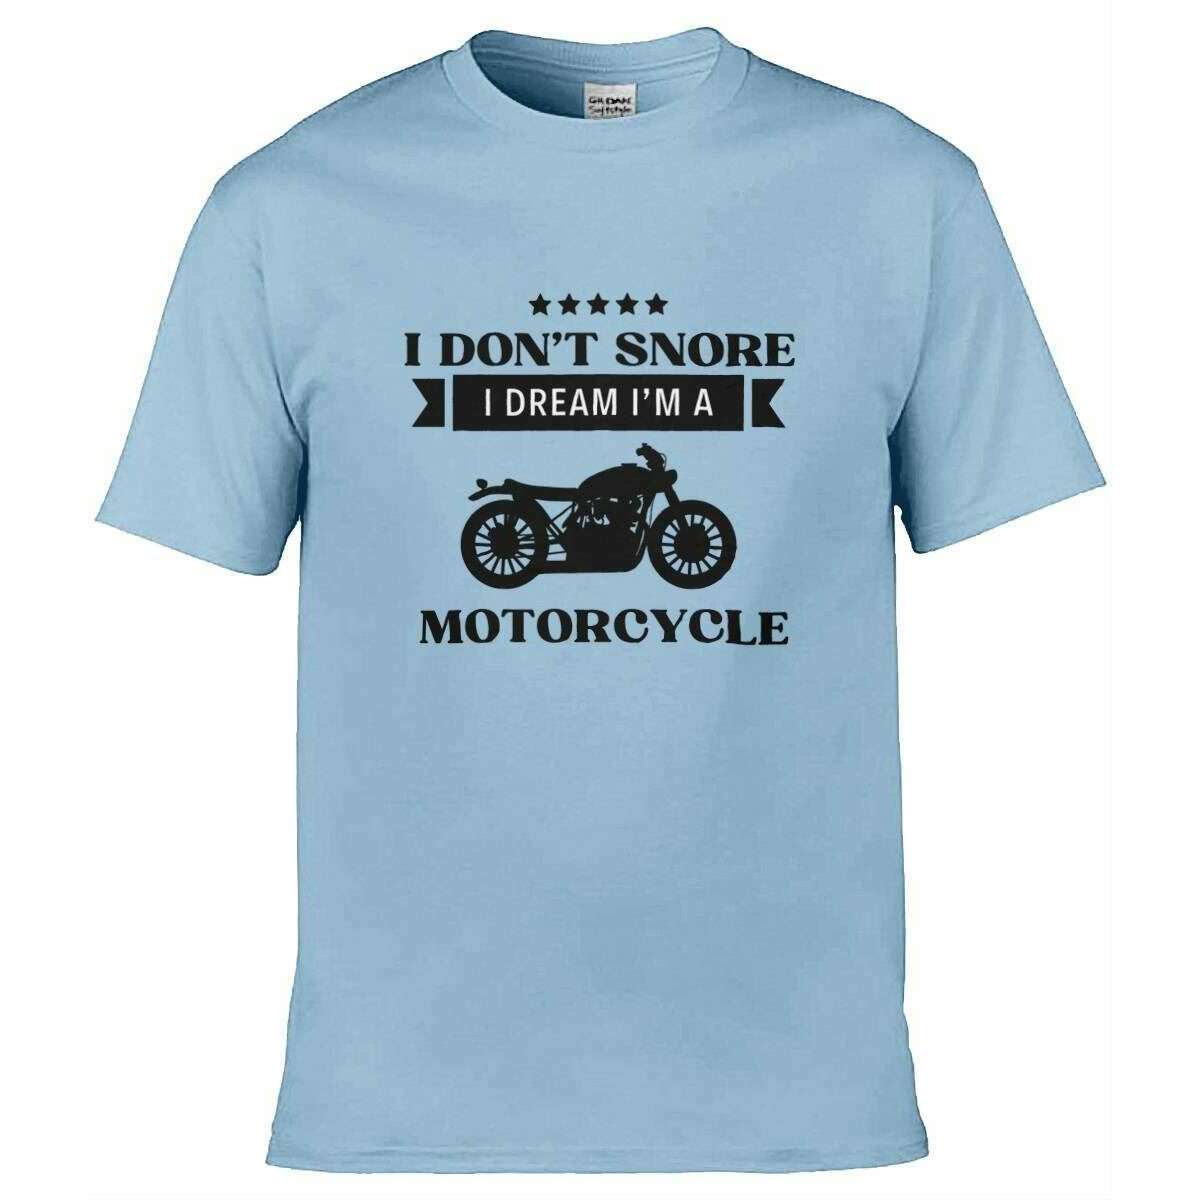 Teemarkable! I Don’t Snore I Dream I’m A Motorcycle T-Shirt